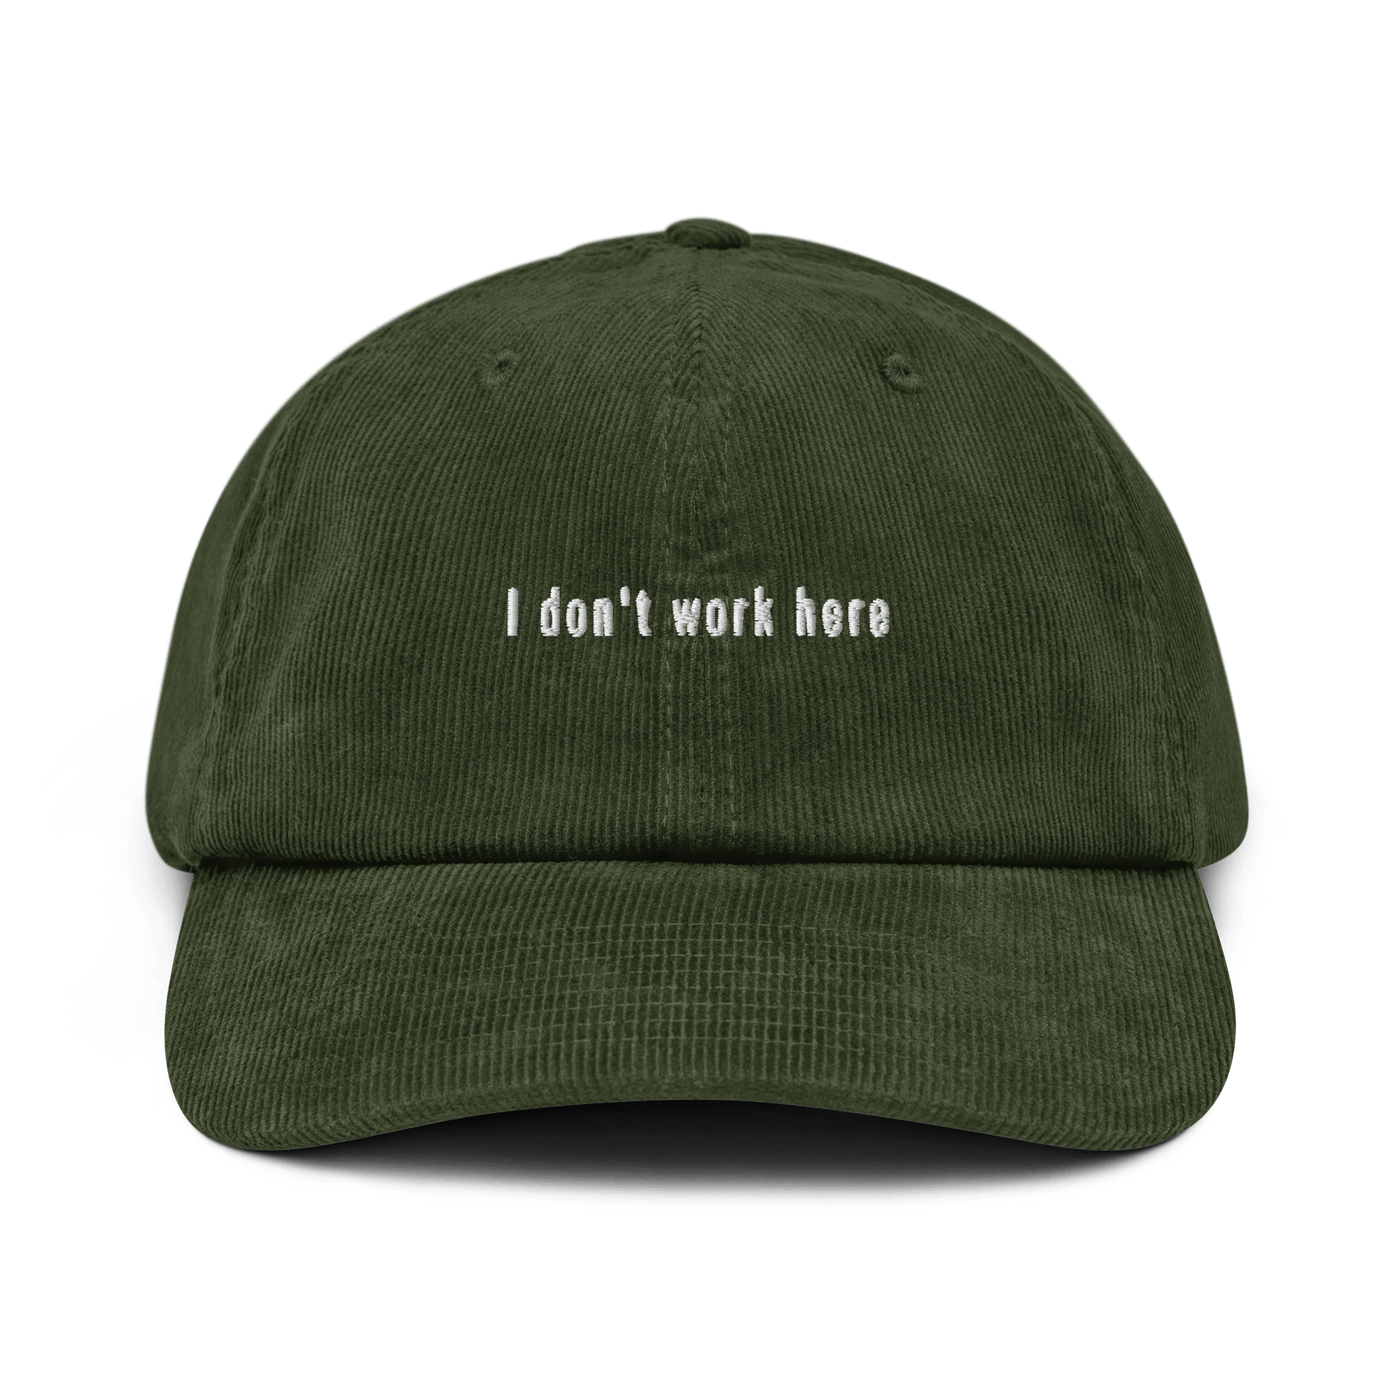 I don't work here Corduroy hat - Dark Olive - - Just Another Cap Store